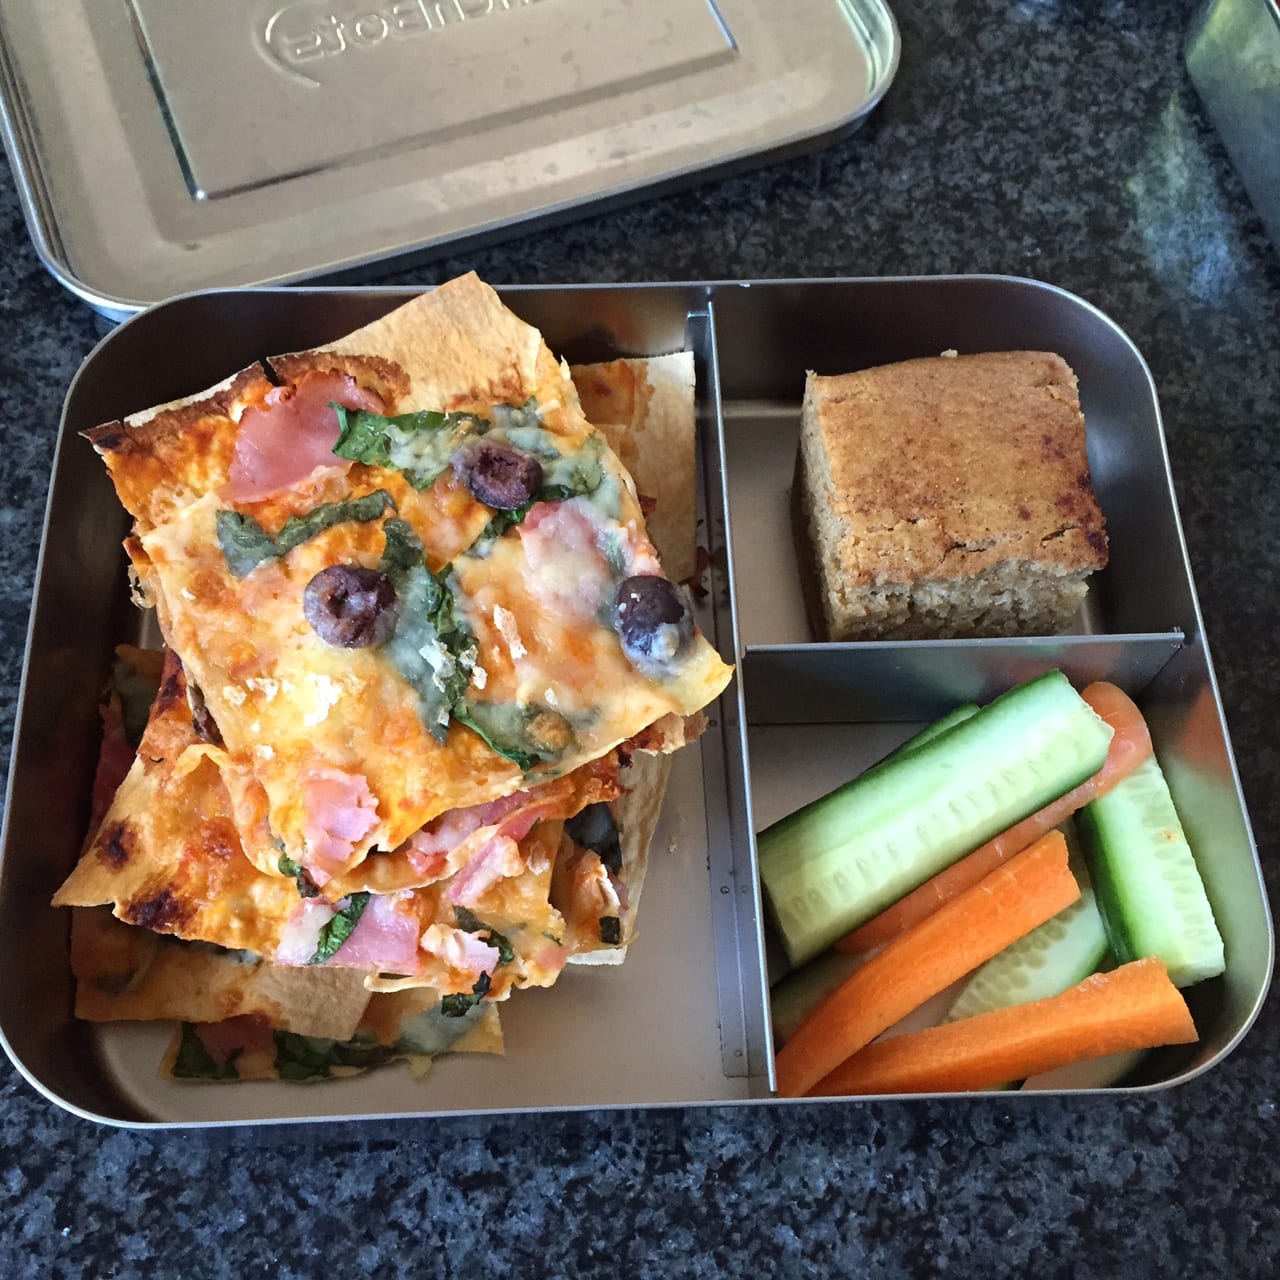 Lunchbots Lunchbox pizza